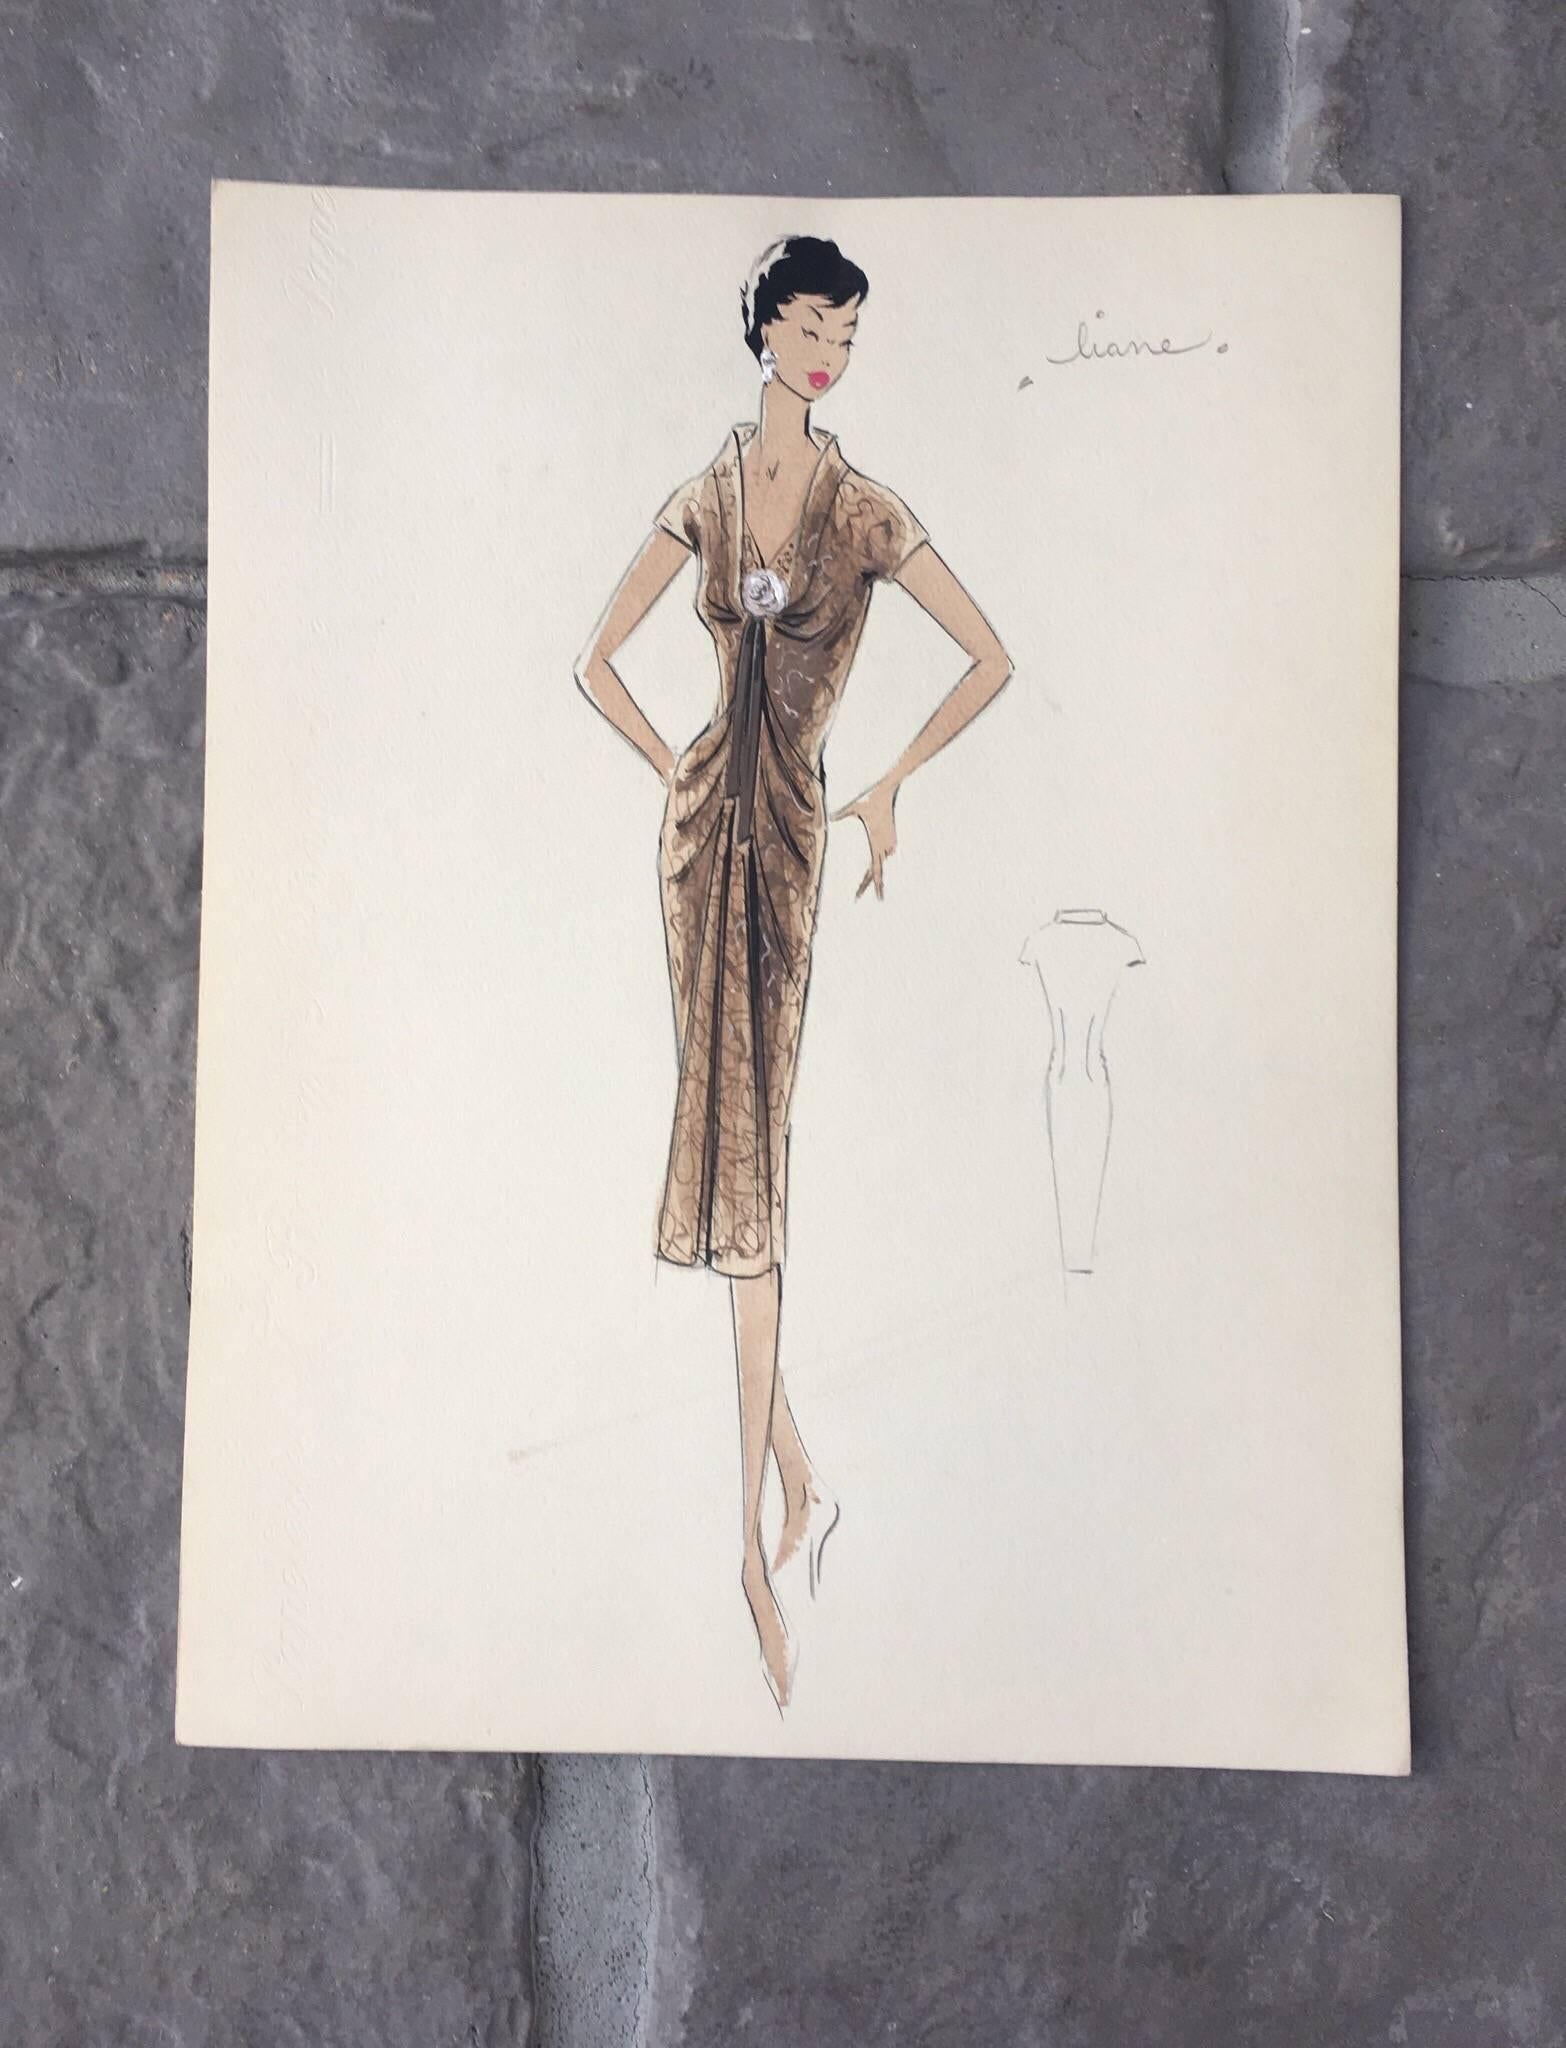 Lady in Elegant 1950's Formal Dress Parisian Fashion Illustration Sketch - Painting by Unknown